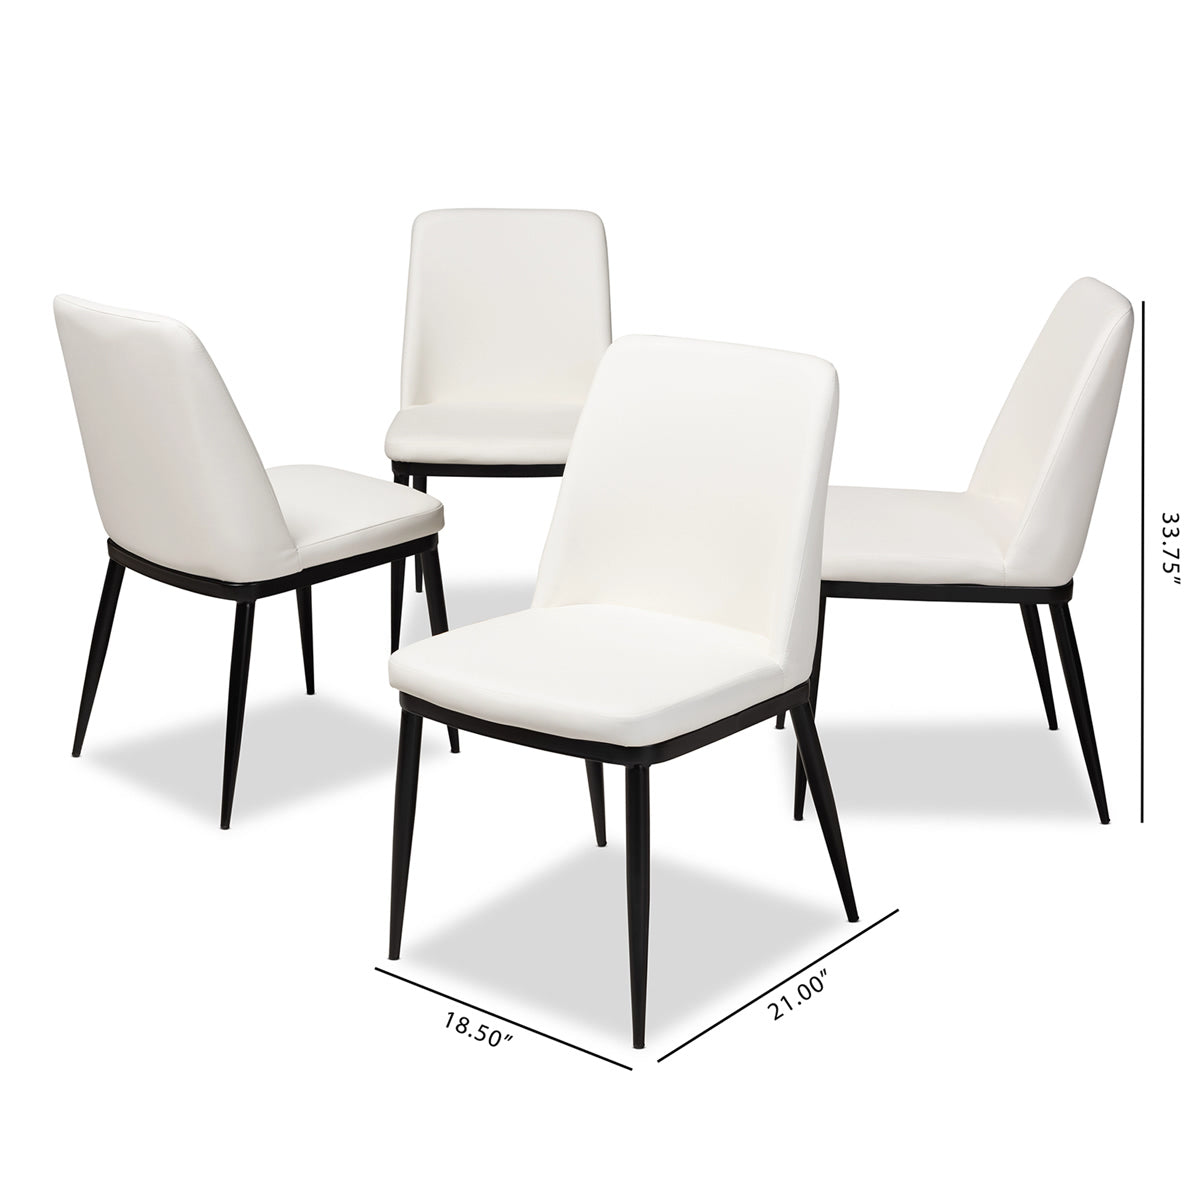 Baxton Studio Darcell Modern and Contemporary White Faux Leather Upholstered Dining Chair (Set of 4) Baxton Studio-dining chair-Minimal And Modern - 5